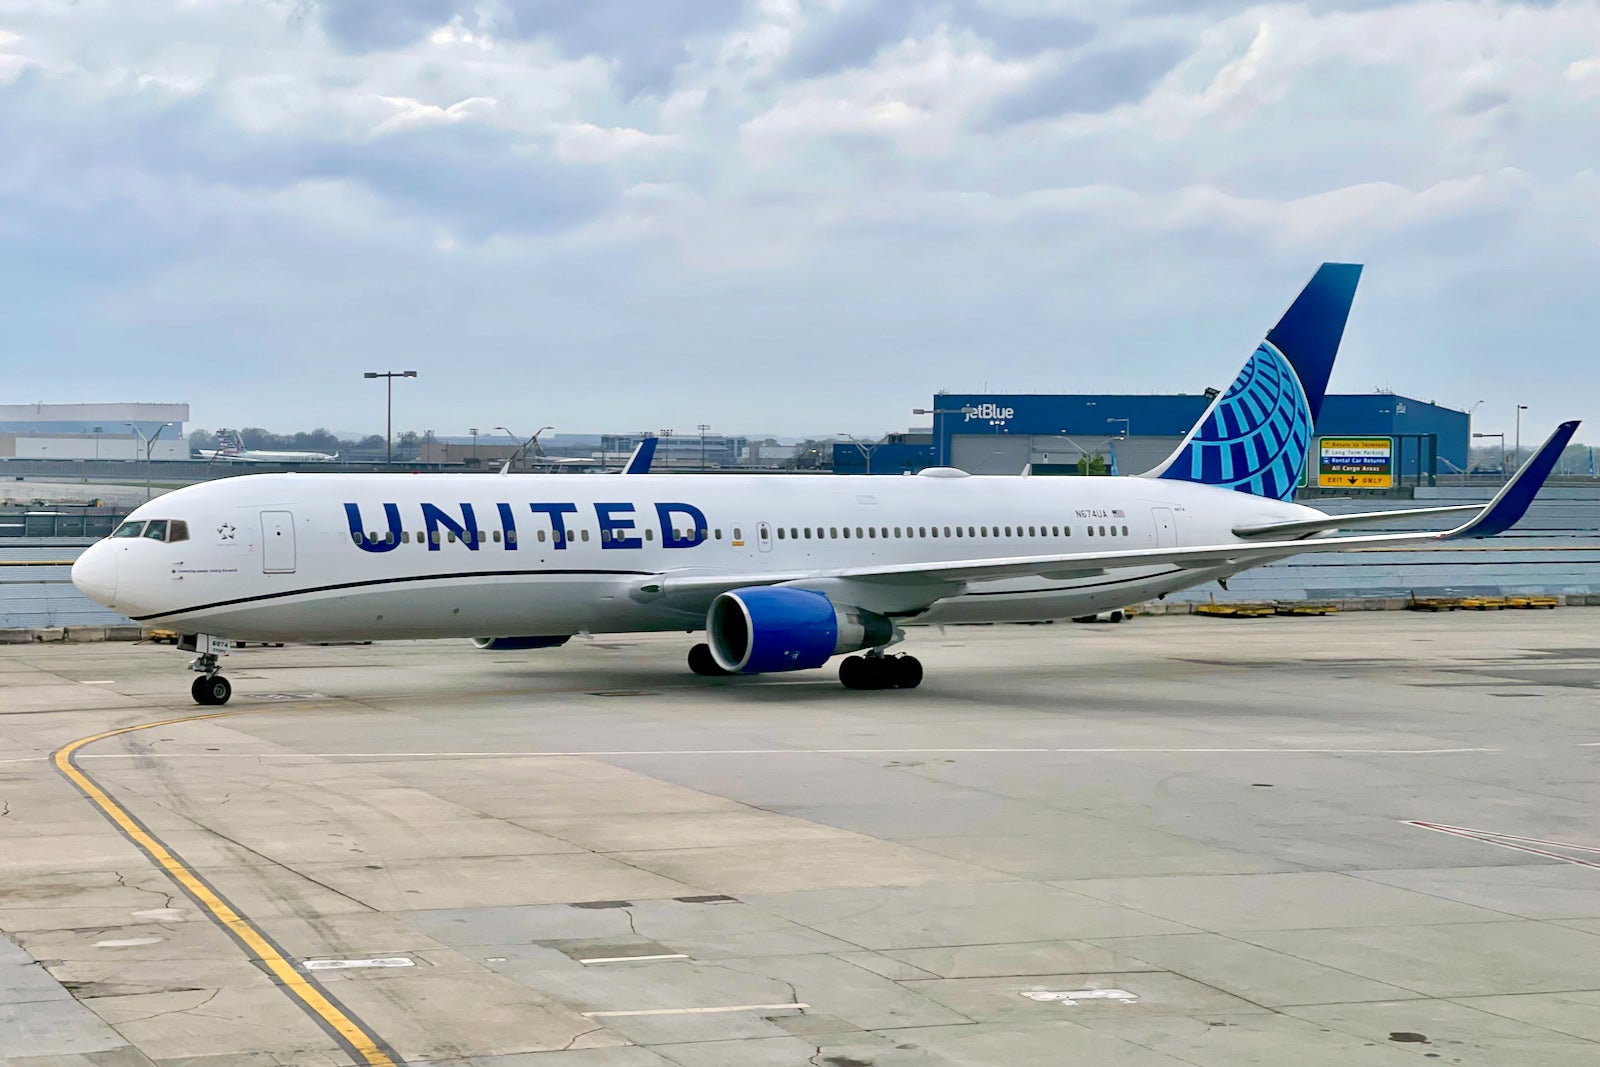 After 19 months, United Airlines is officially suspending flights at New York's ..